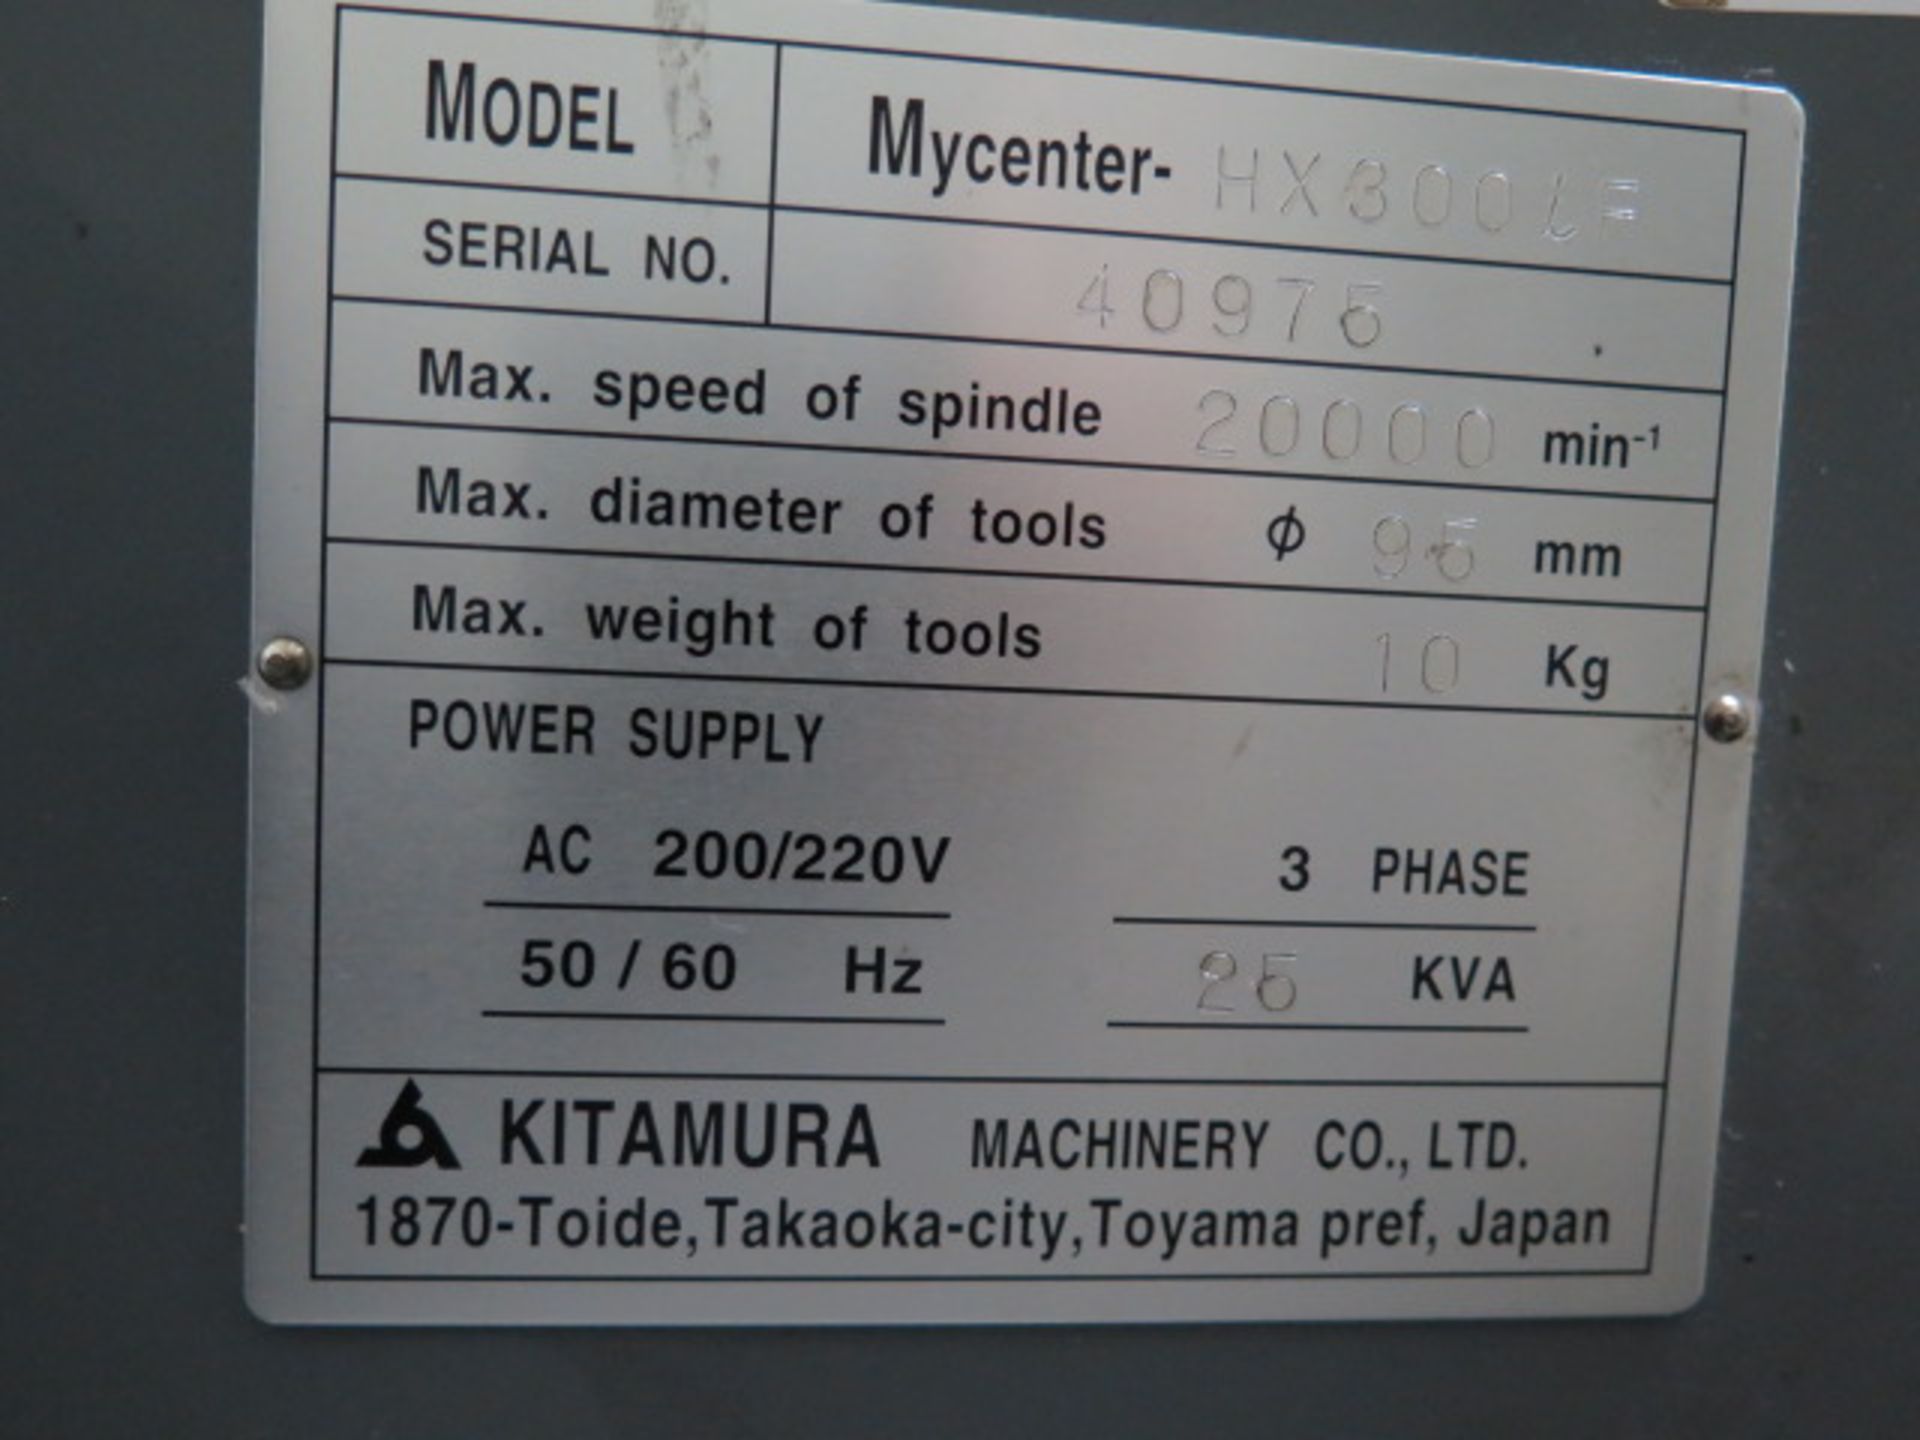 Kitamura Mycenter HX300iF 2-Paller 4-Axis CNC Horizontal Machining Center s/n 40975 SOLD AS IS - Image 26 of 26